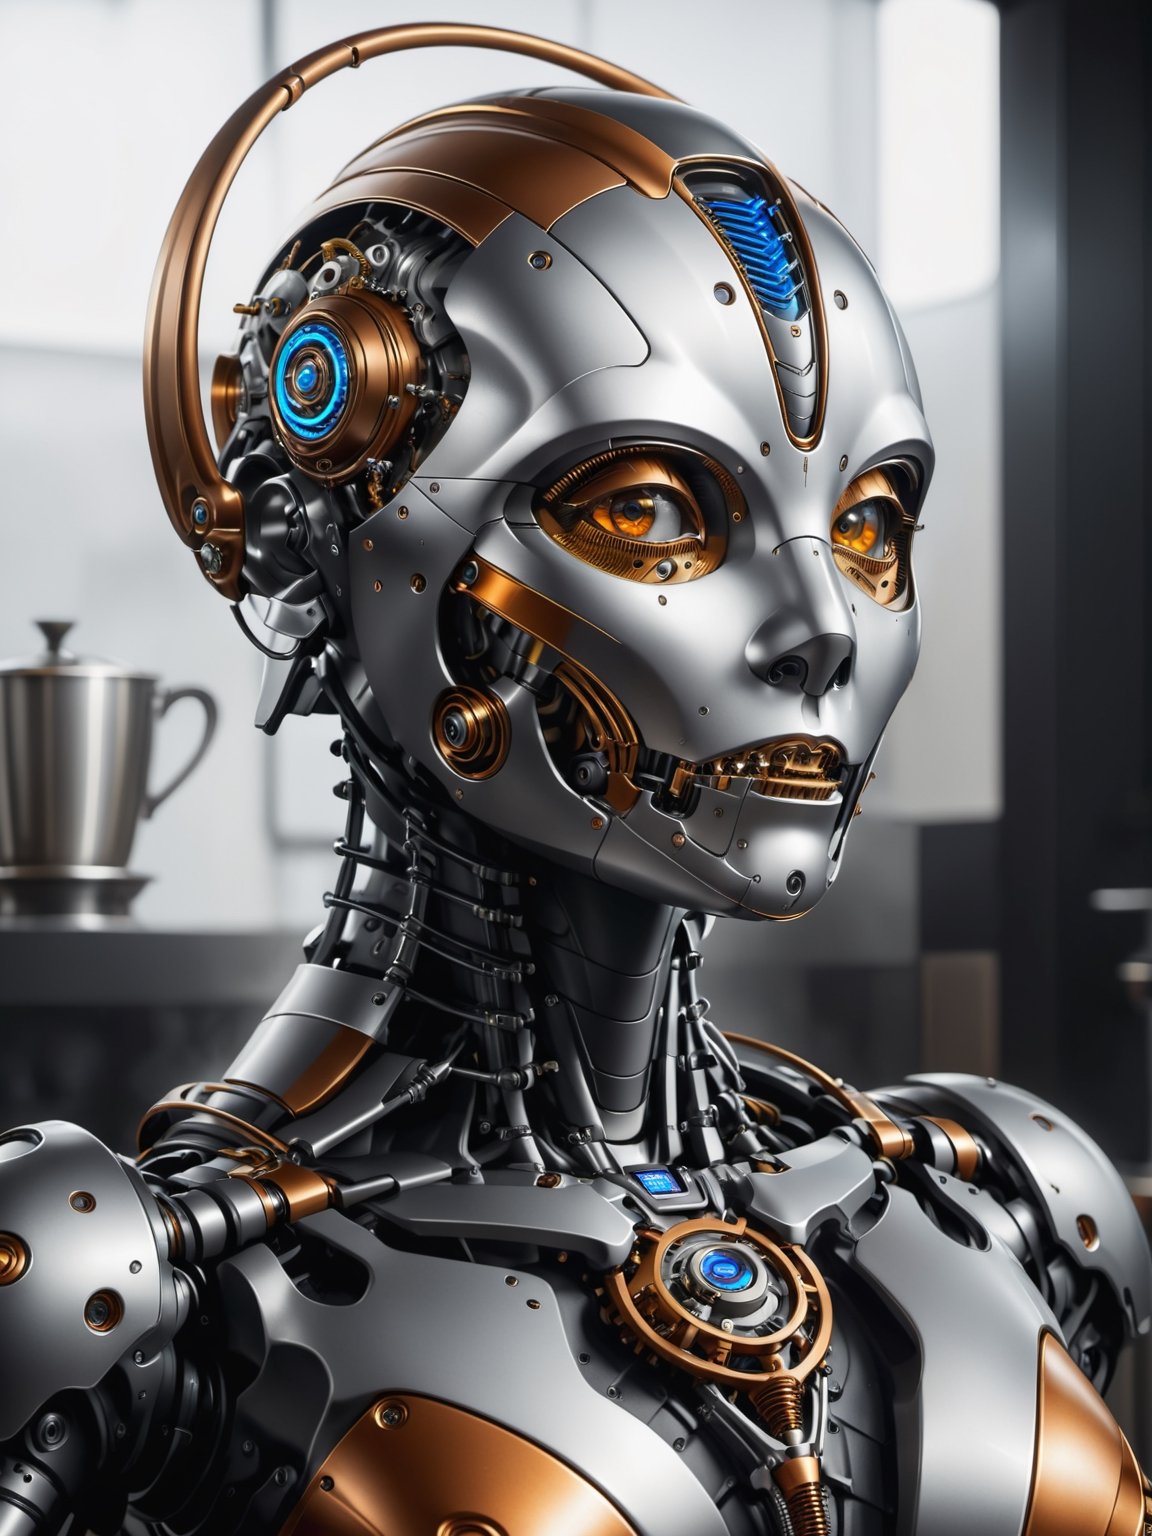 best qualtiy,8k,A high resolution,hyper-detailing,((1 robot butler)),（Robot, head made of titanium alloy machinery, body made of vibranium steaming cup of coffee on a tray in a futuristic cyberpunk kitchen,an ultrafine painting,tack sharp focus,physically-based renderingt,Extremely detailed description,professional,Bright ,Steampunk,Color syberpunk,sci fi,  Art,  art by Ray Shark,